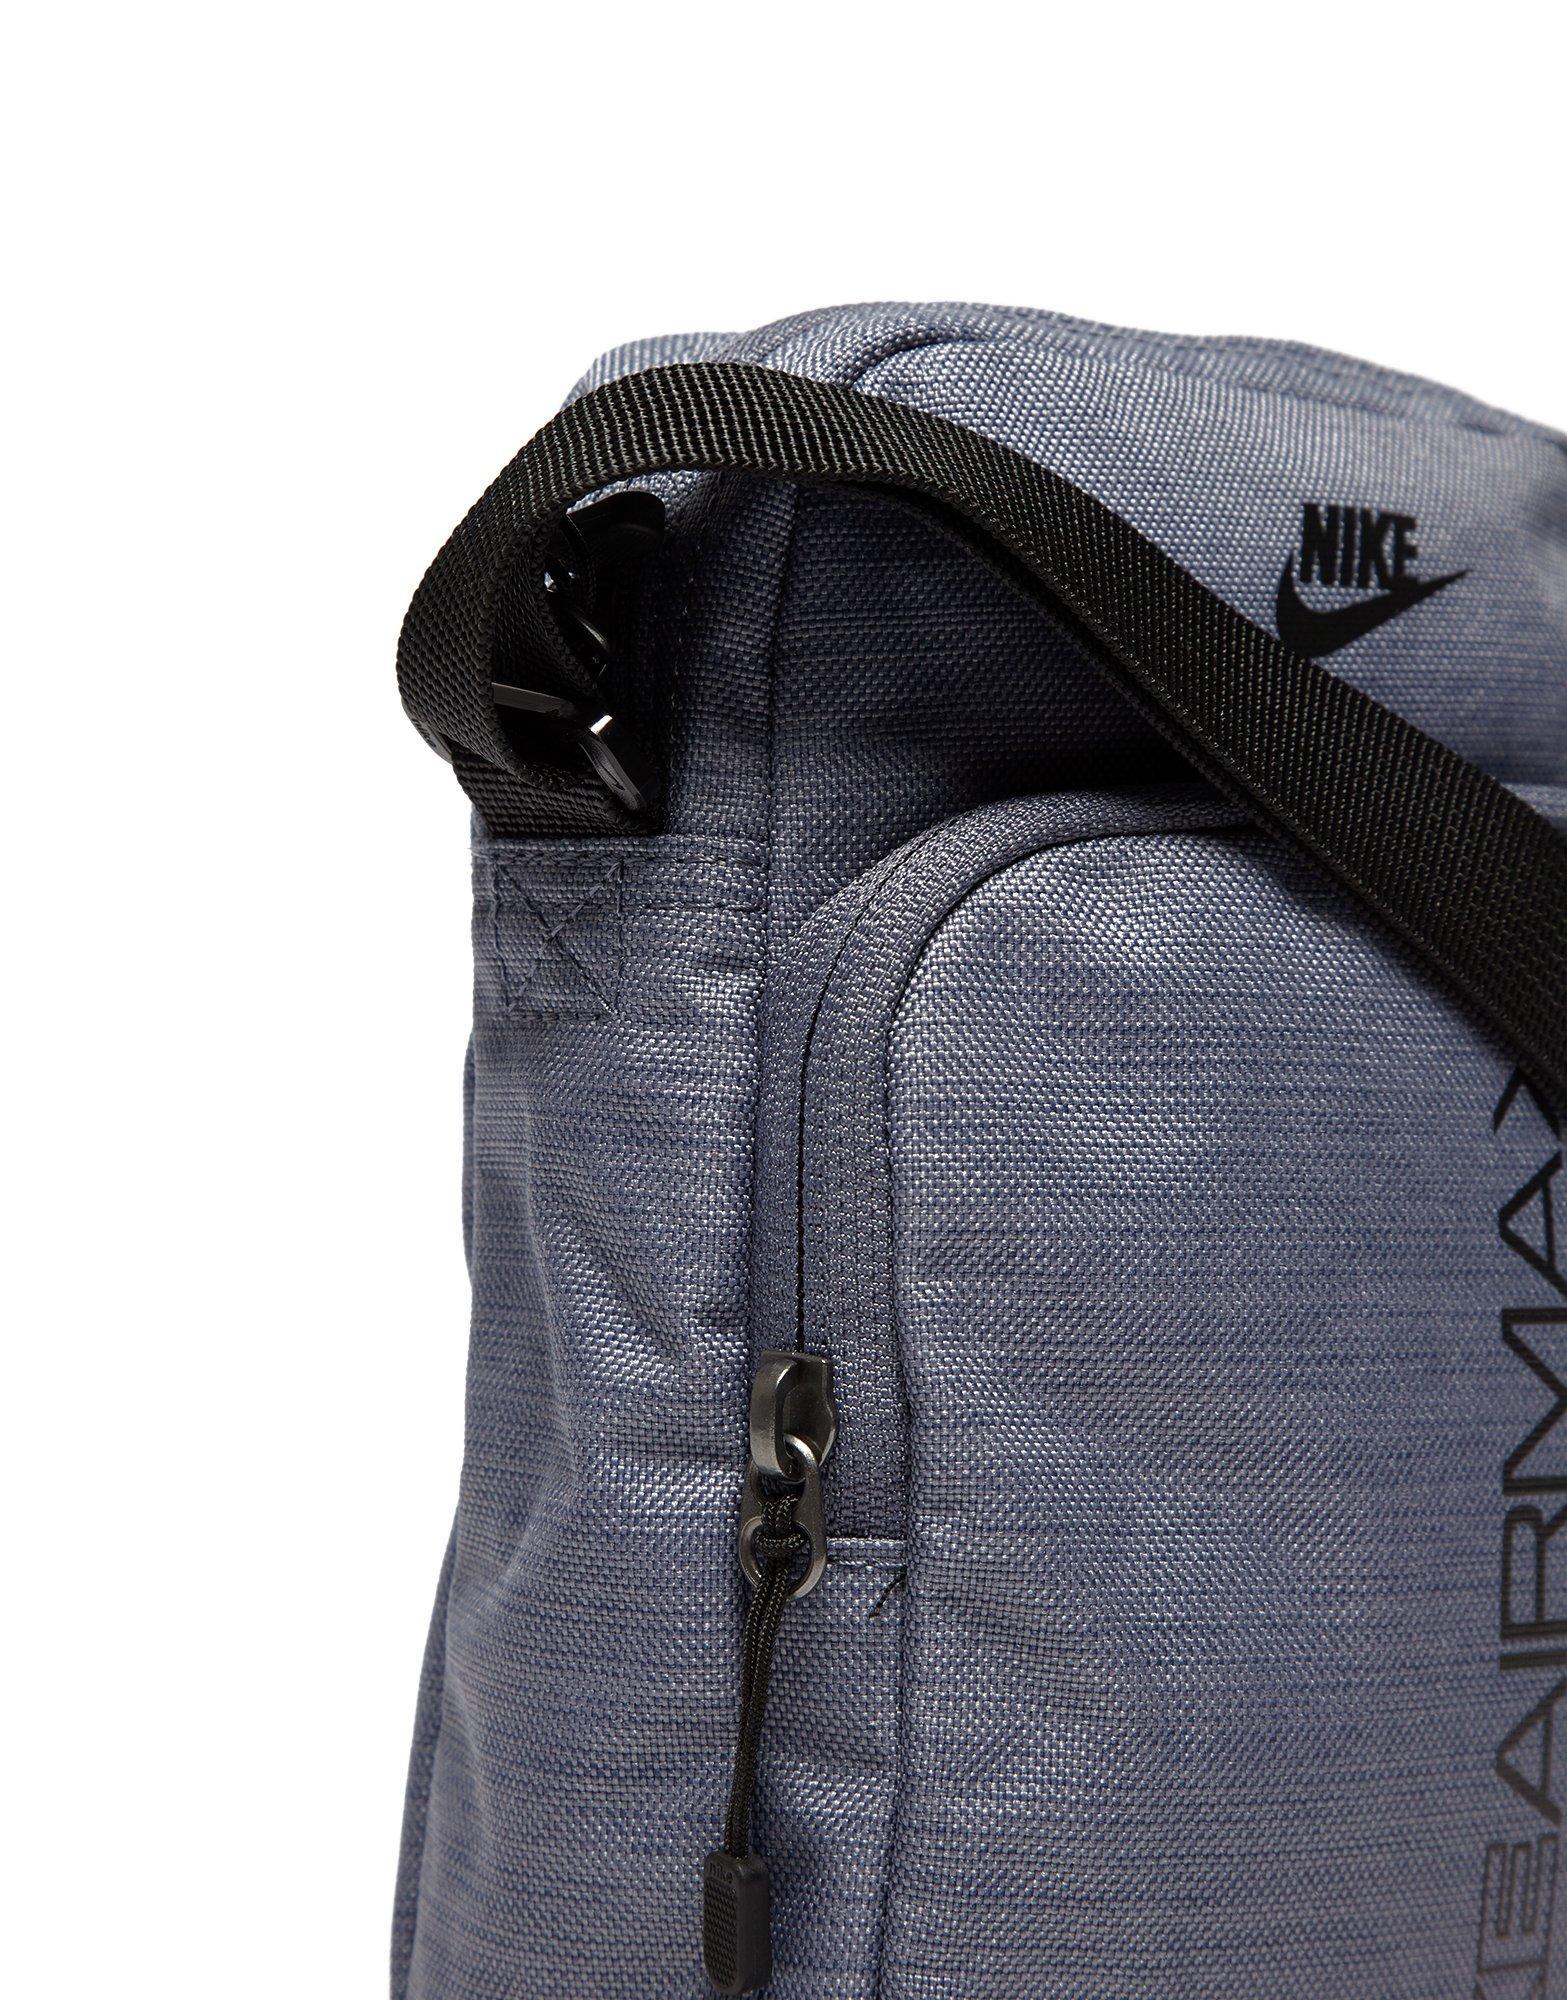 Nike Air Max Small Bag in Gray for Men - Lyst